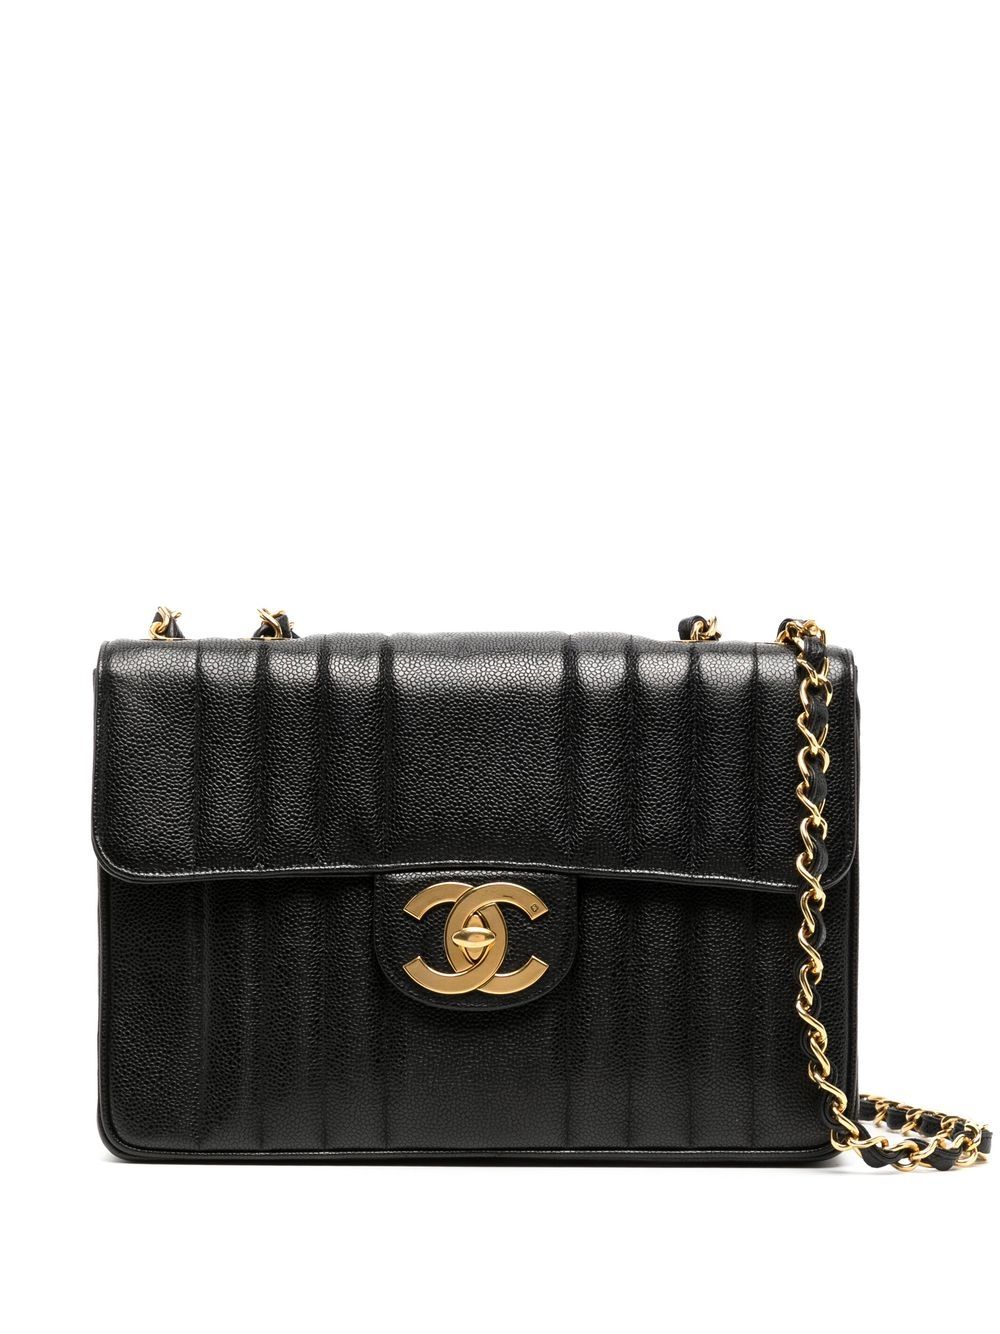 Pre-owned Chanel 1992 Mademoiselle Classic Flap Shoulder Bag In Black